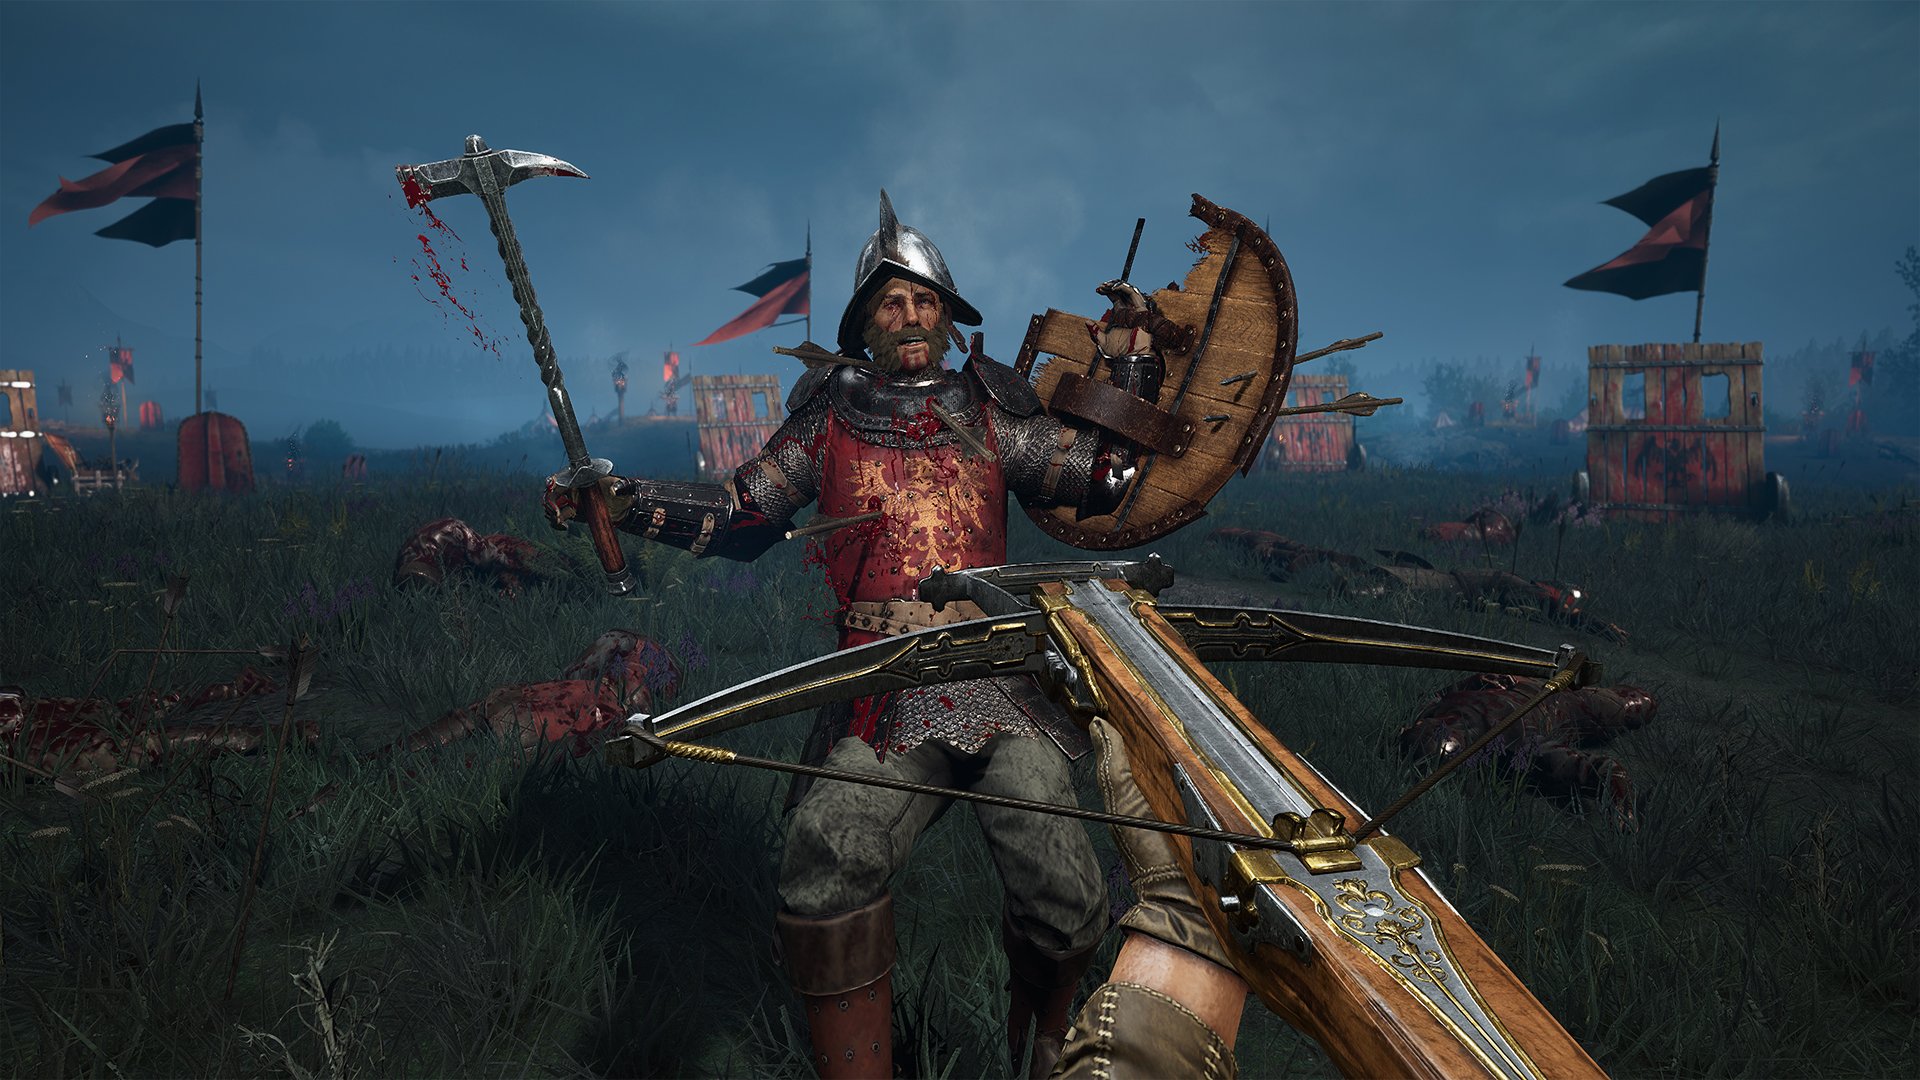 April 23-26: Join the Chivalry 2 Cross-Play Closed Beta! - Chivalry 2